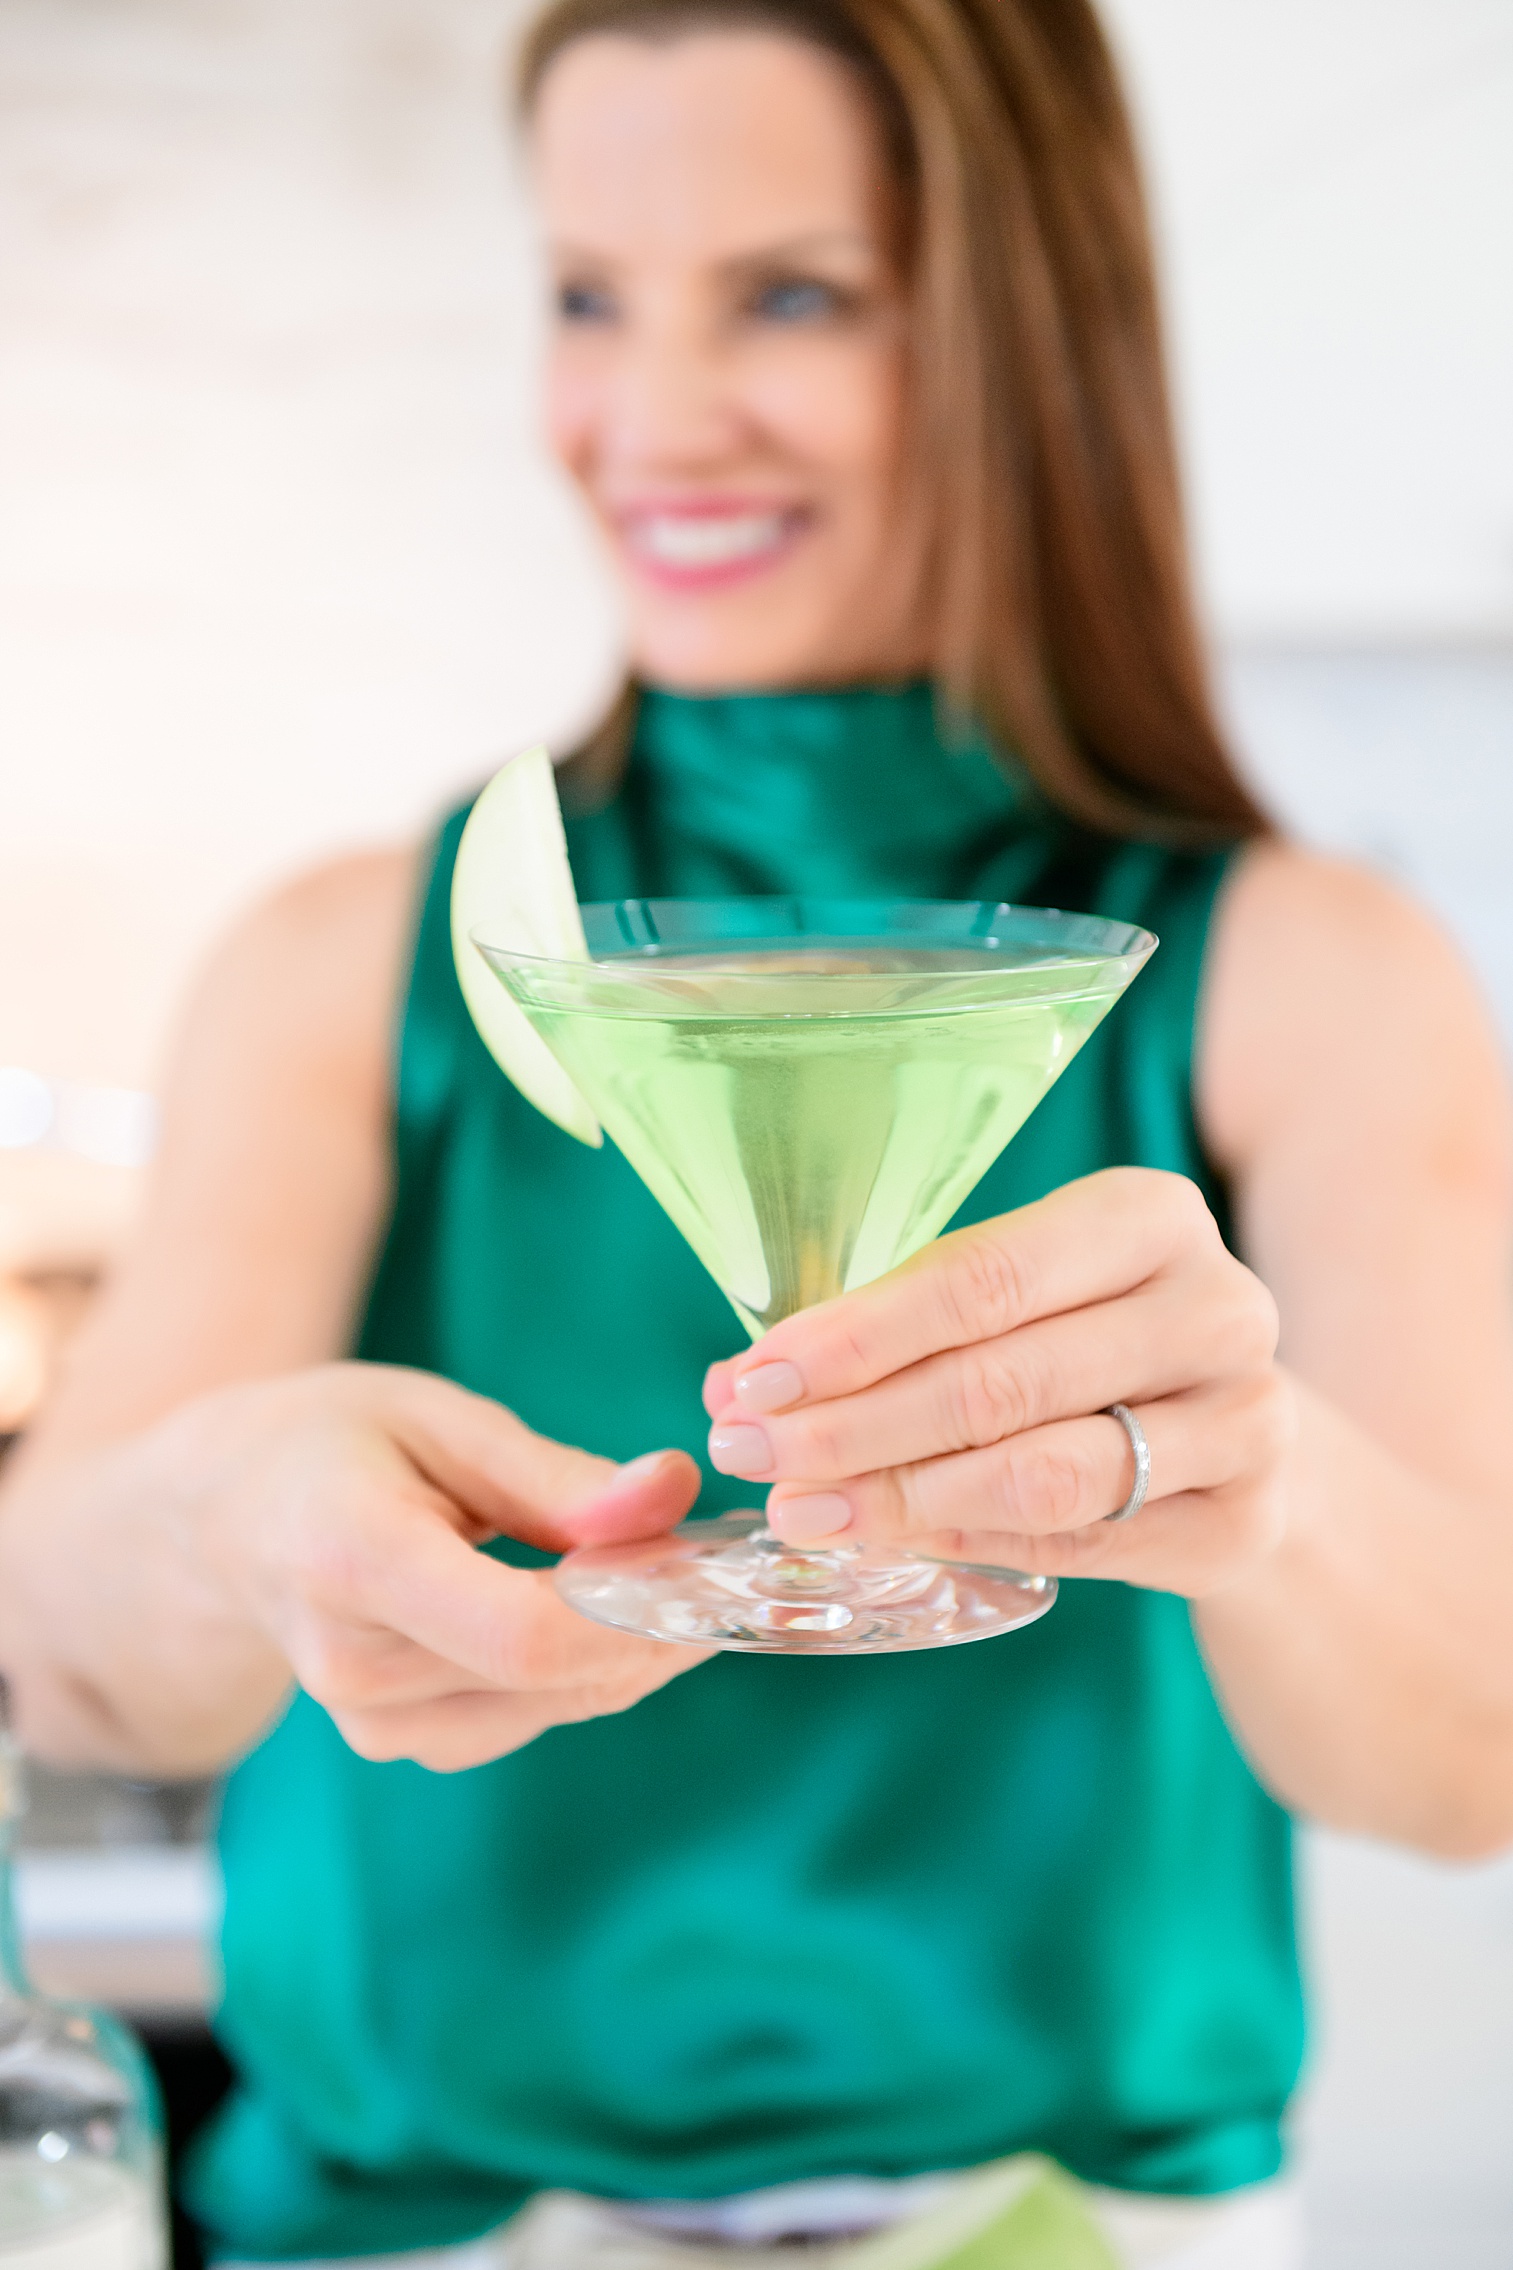 St. Patrick's Day Sour Apple Martini #cocktail #stpatricksday #martini #cocktailrecipe #hosting 